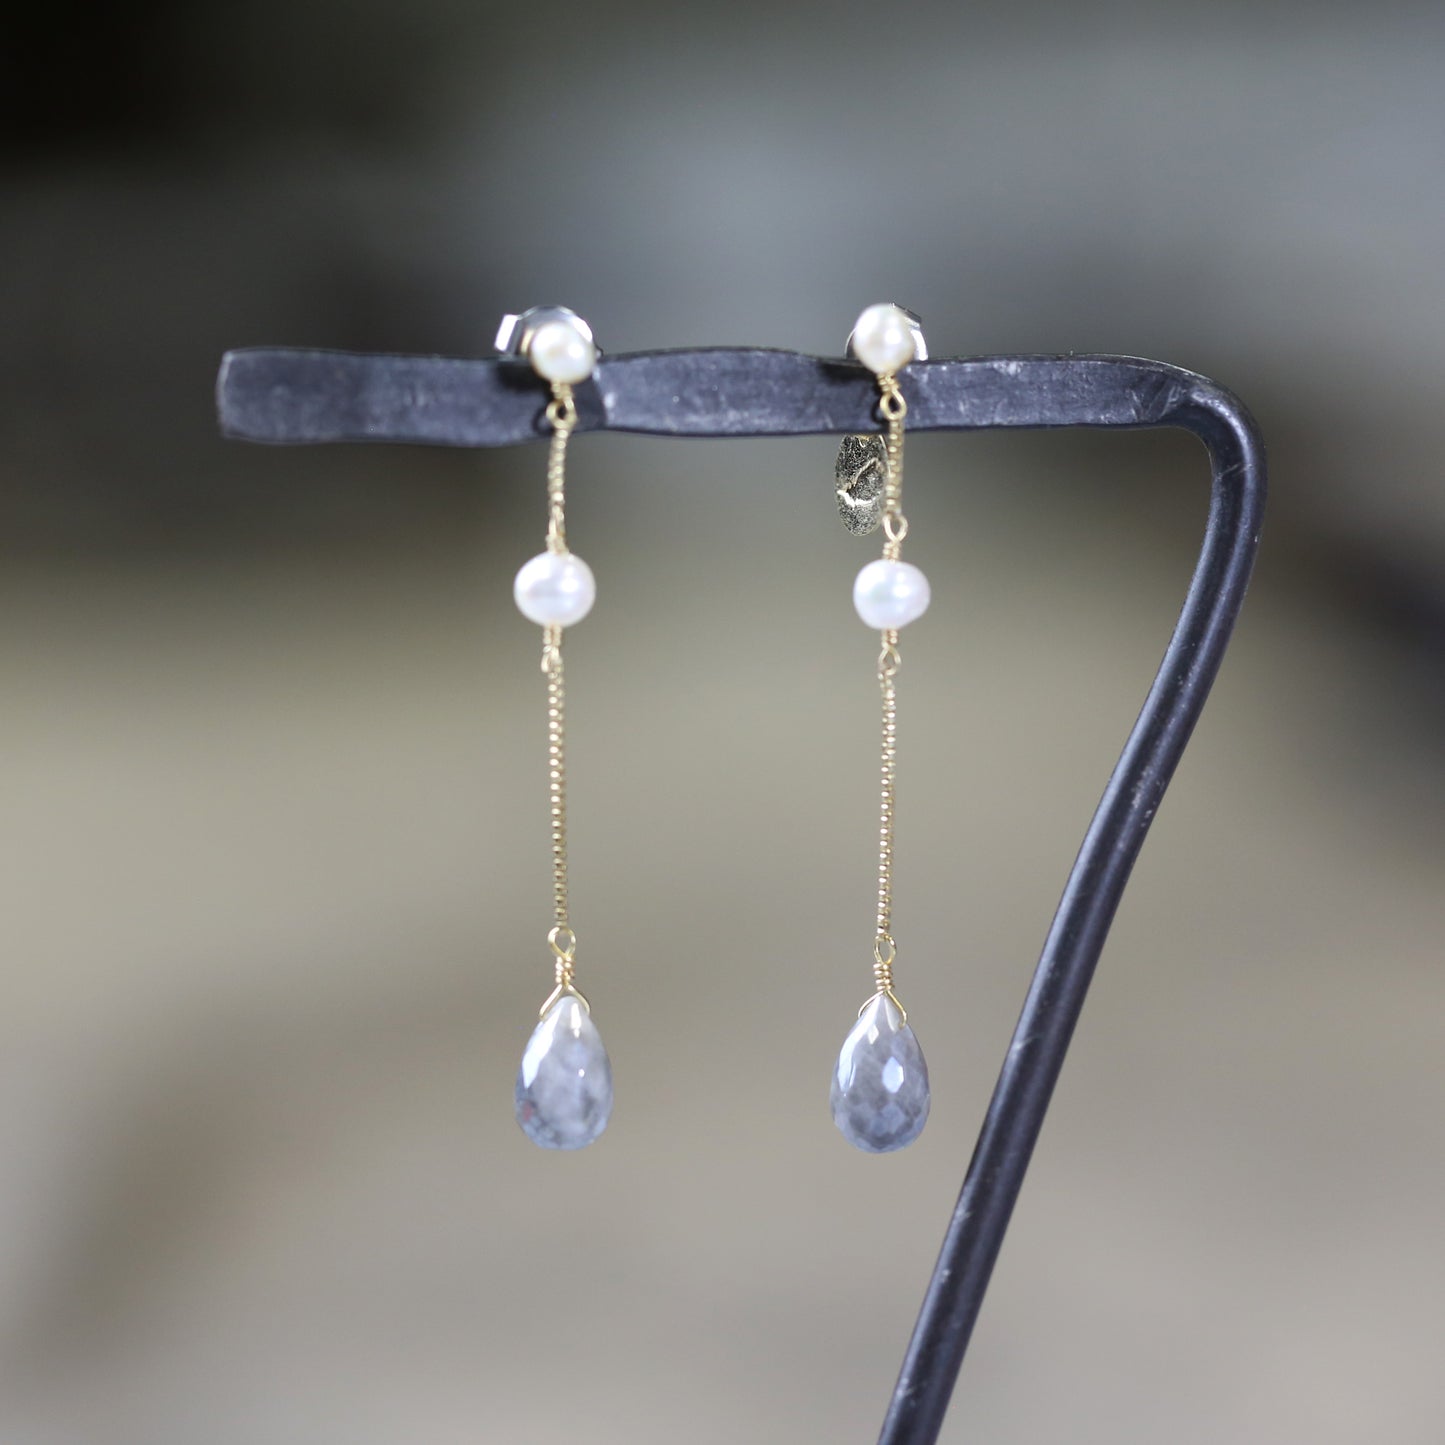 Freshwater pearls and graceilver night earrings